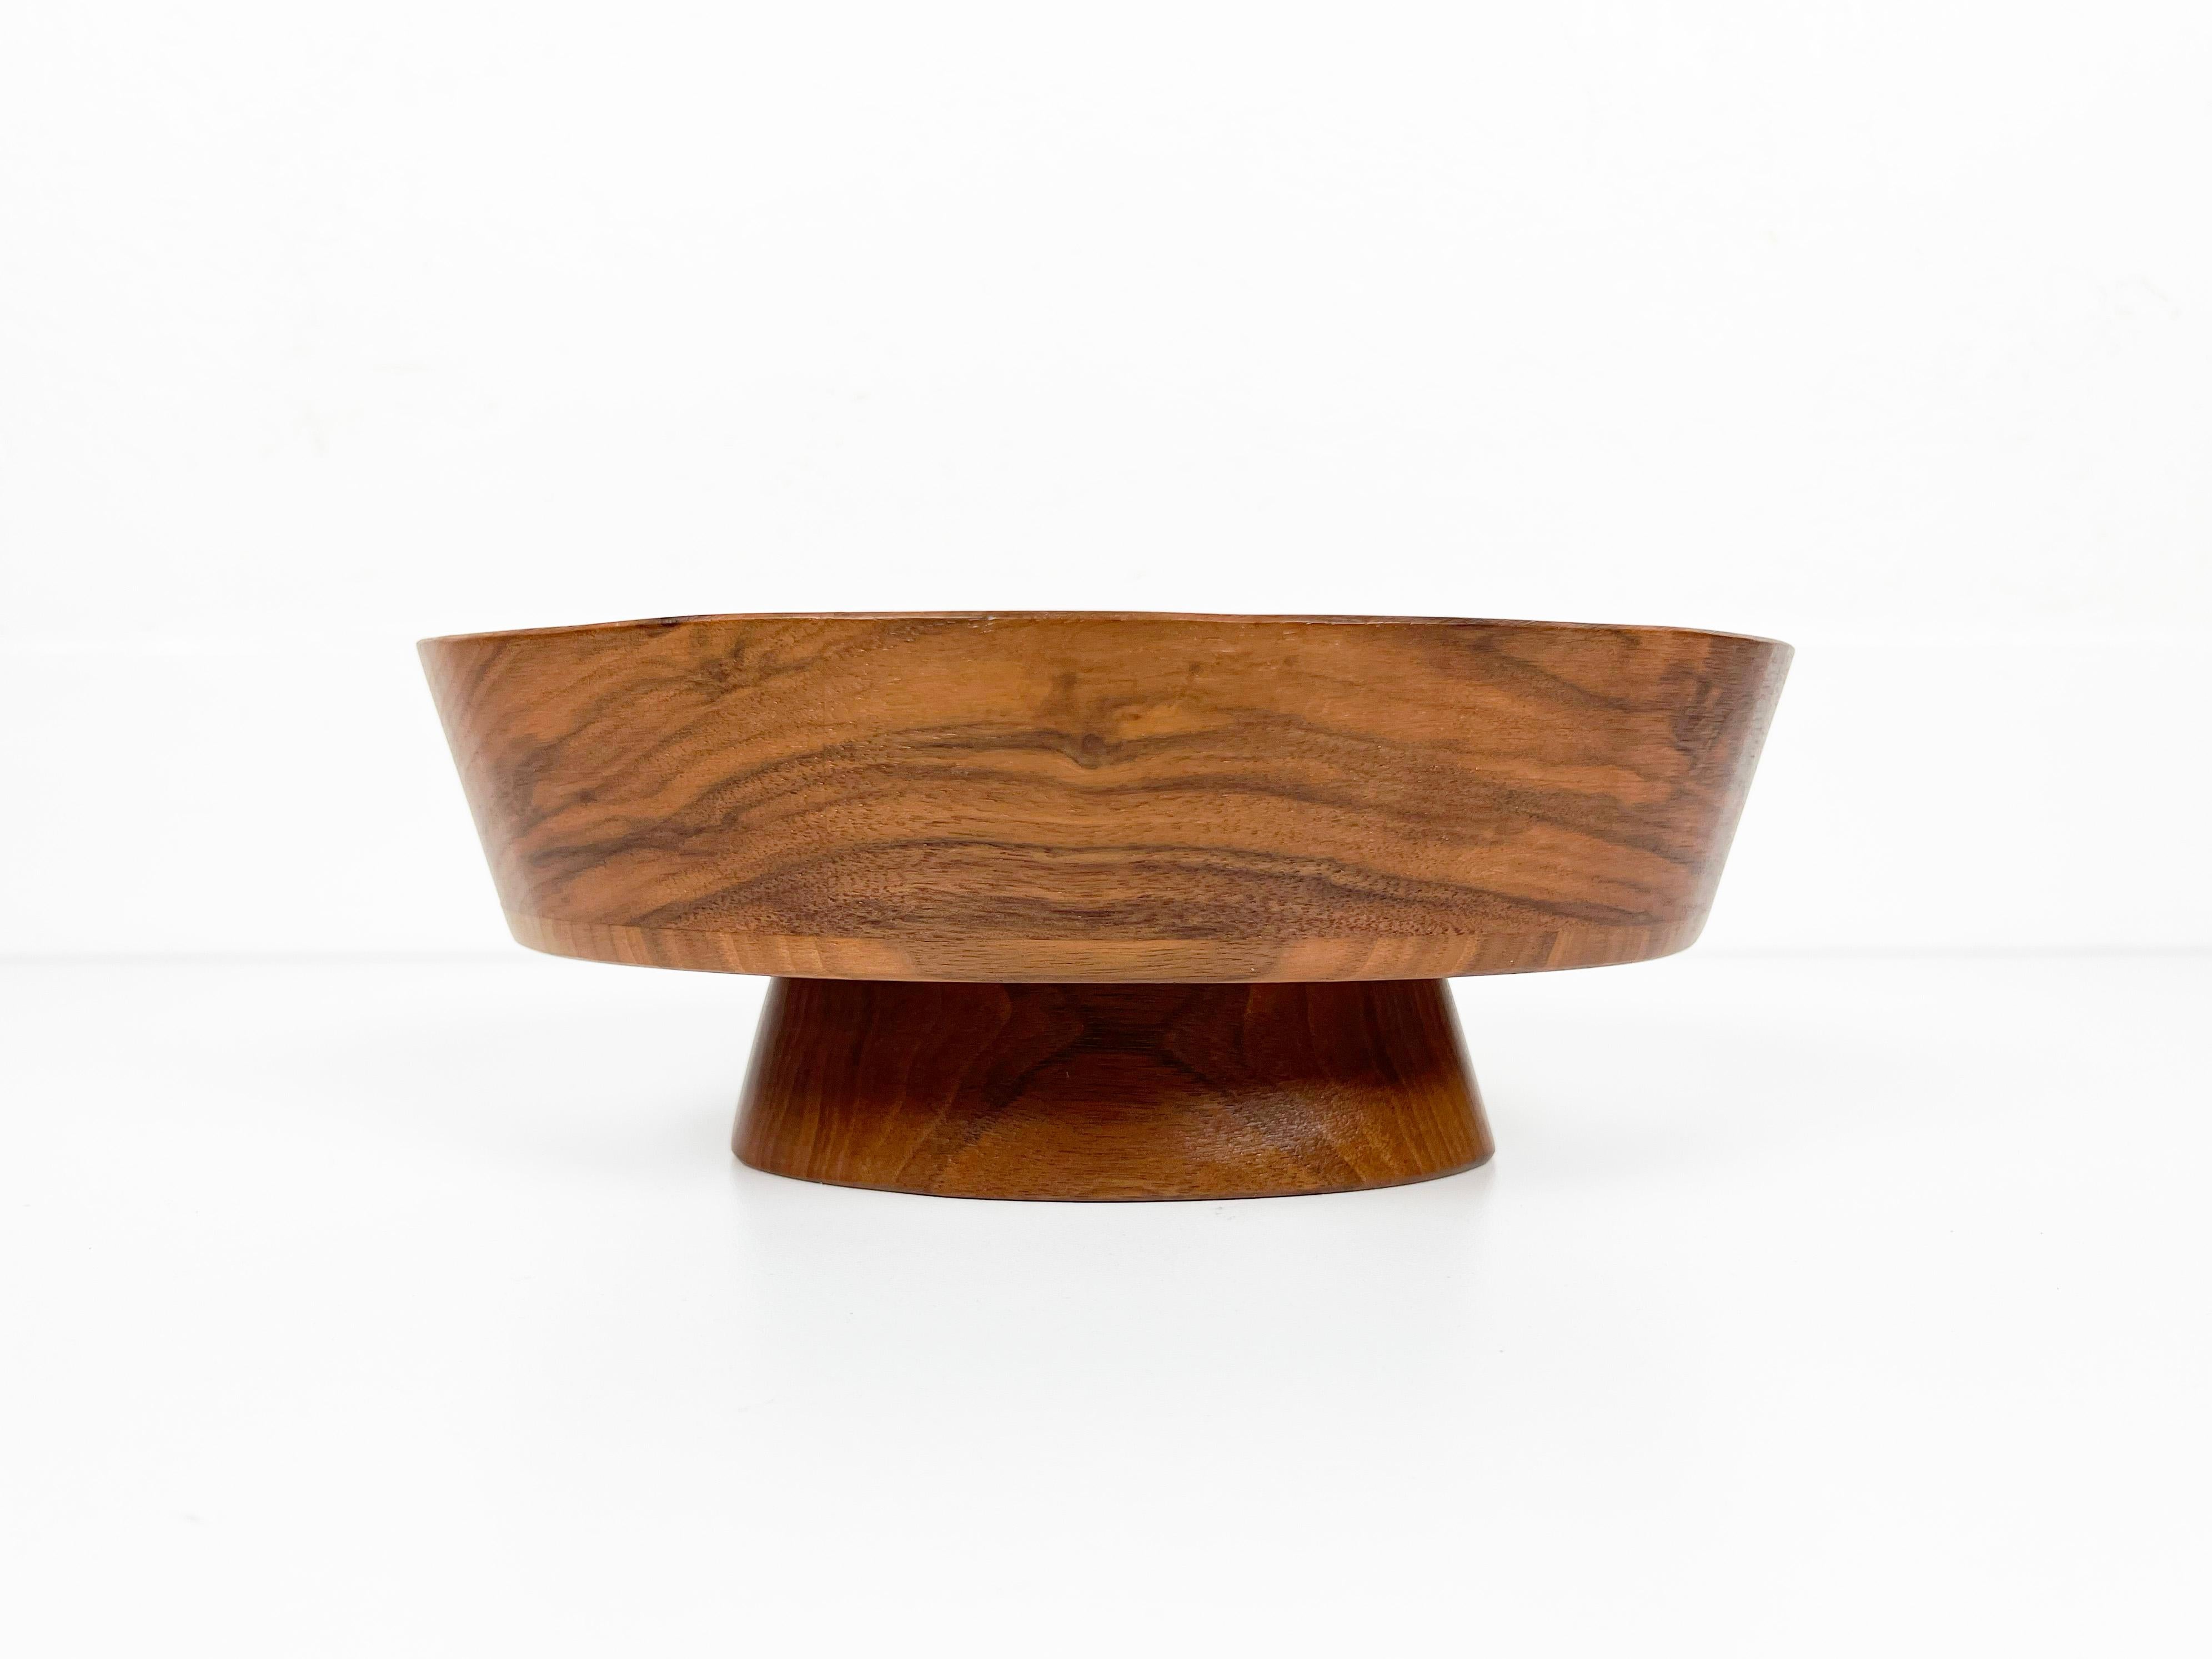 Vintage studio crafted oval shaped footed bowl expertly made from beautiful walnut. 

Year: 1970s

Origin: USA

Style: Mid-Century Modern

Dimensions: 9.5